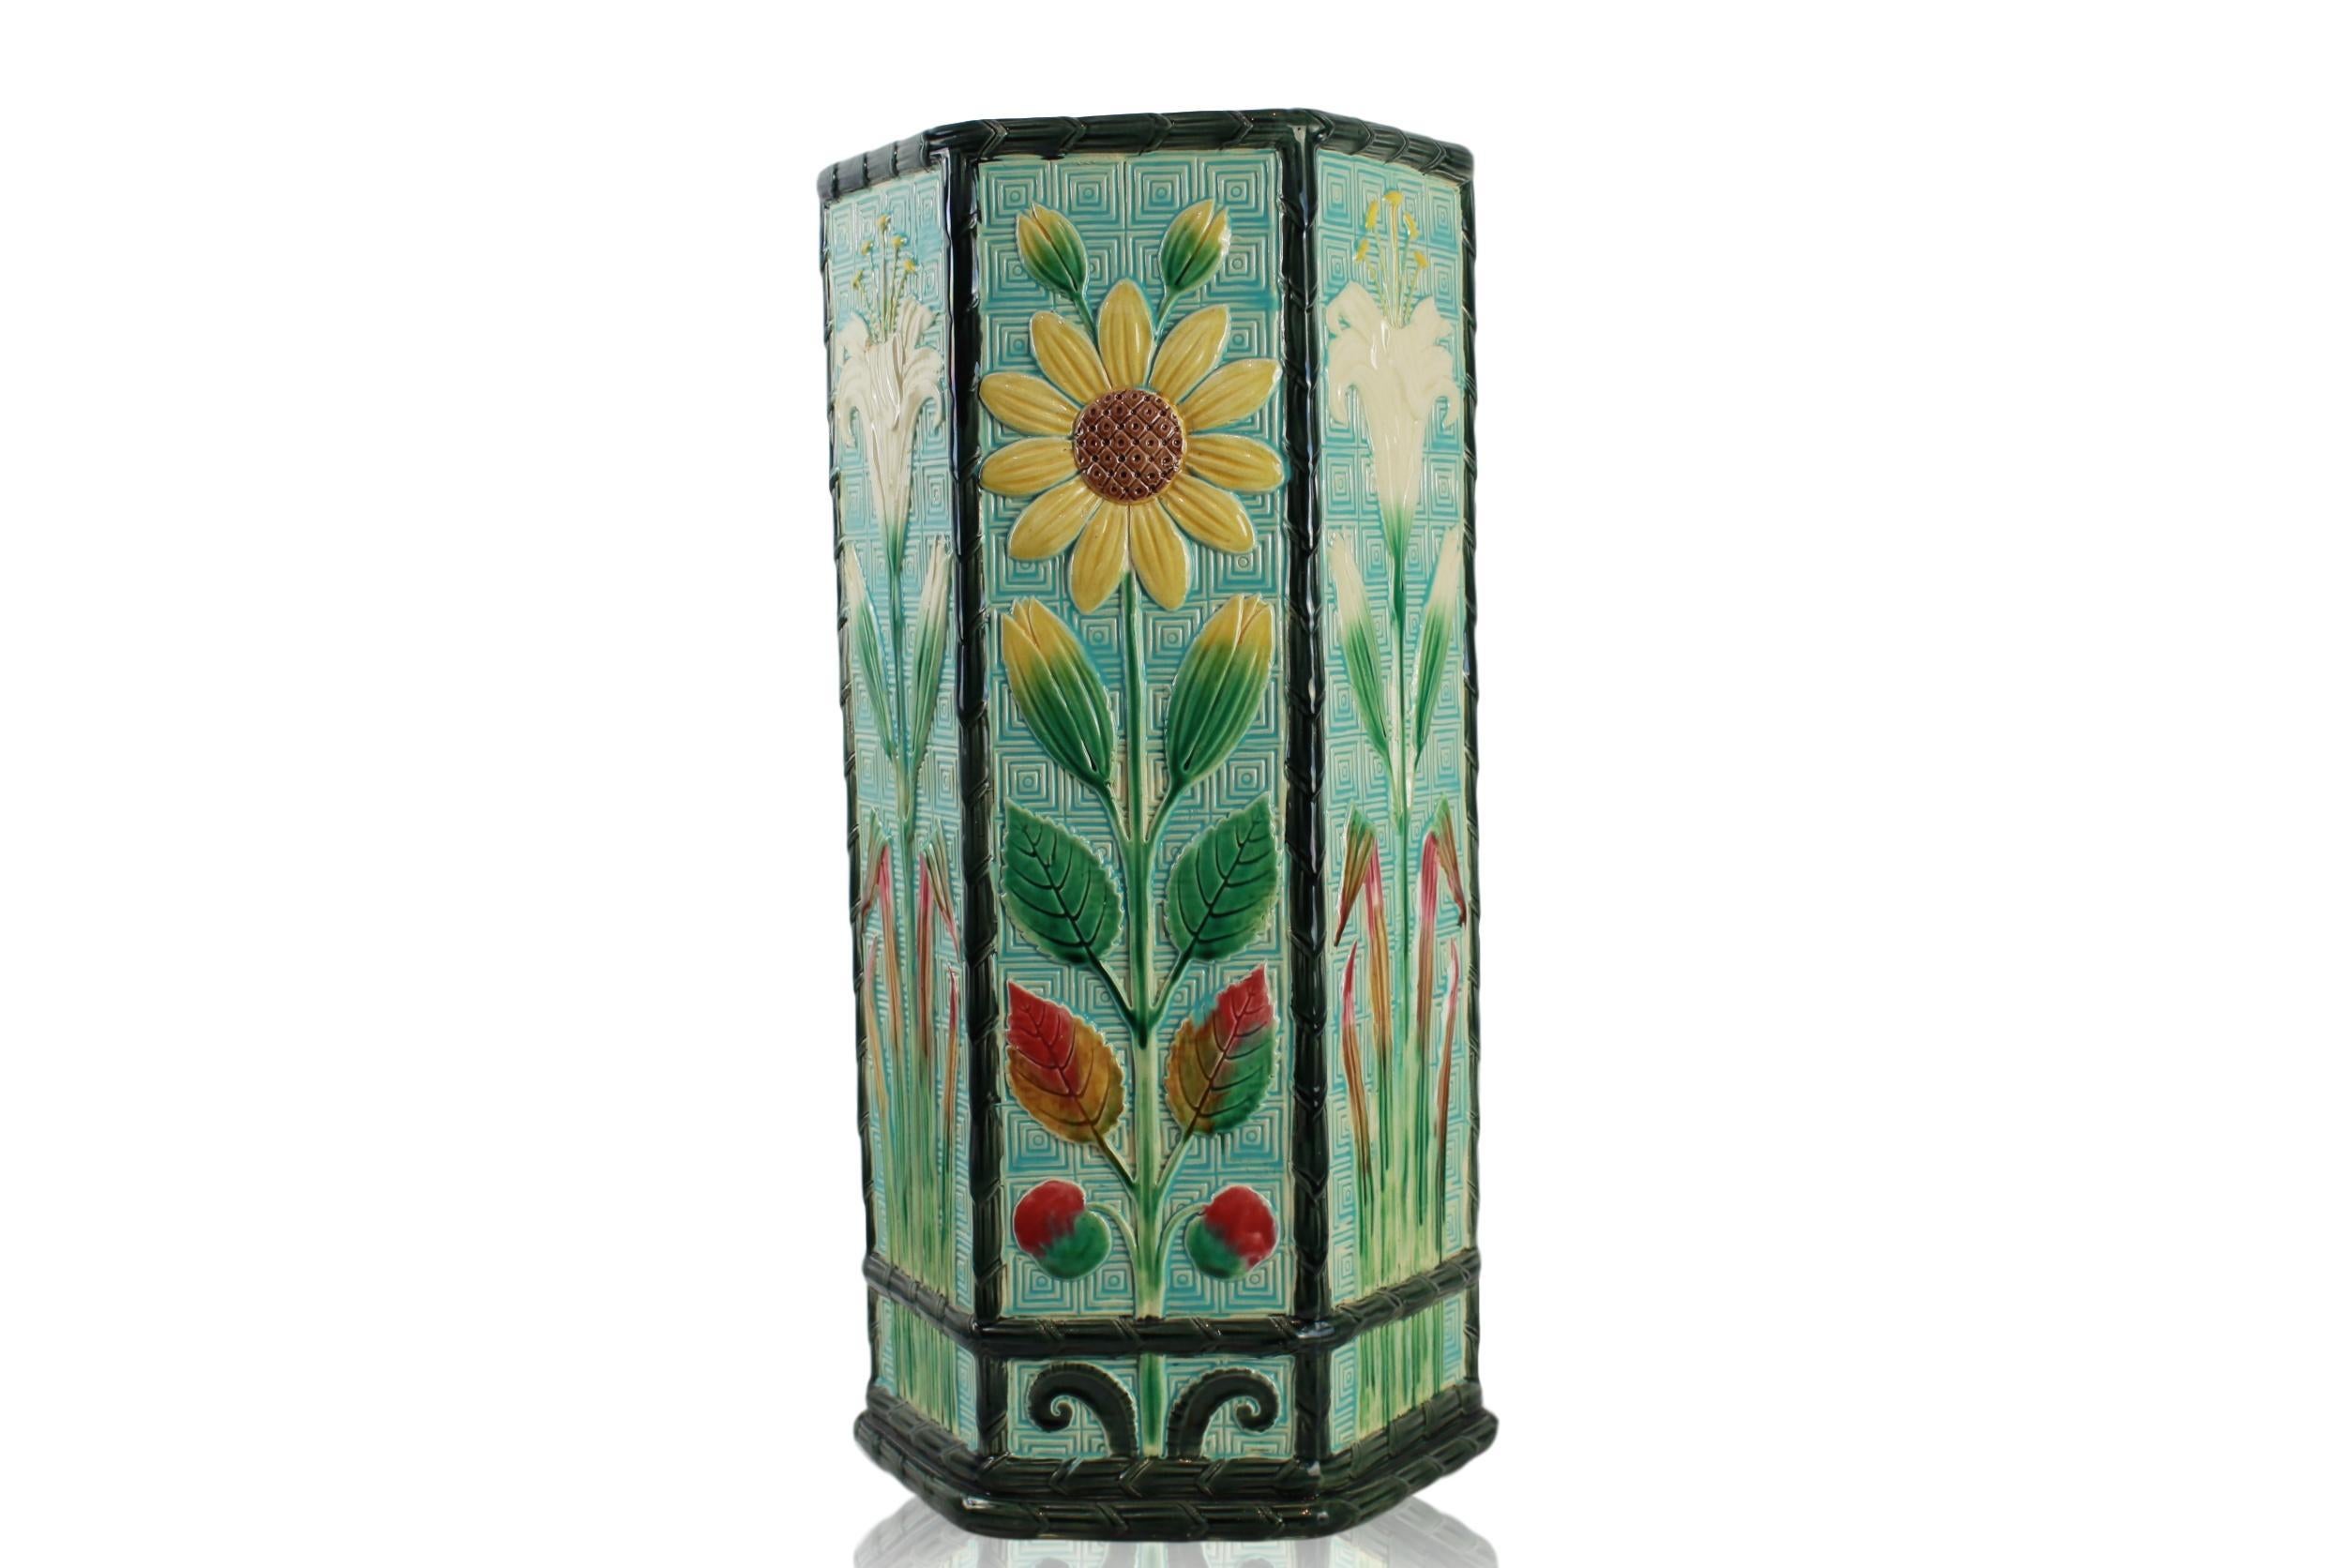 Wedgwood Majolica Aesthetic Movement umbrella stand, 21.75-ins High, with a turquoise fret pattern ground, of hexagonal form, the sides molded with an alternating stylized sunflower and lily, with black glazed reed and ribbon borders, the interior